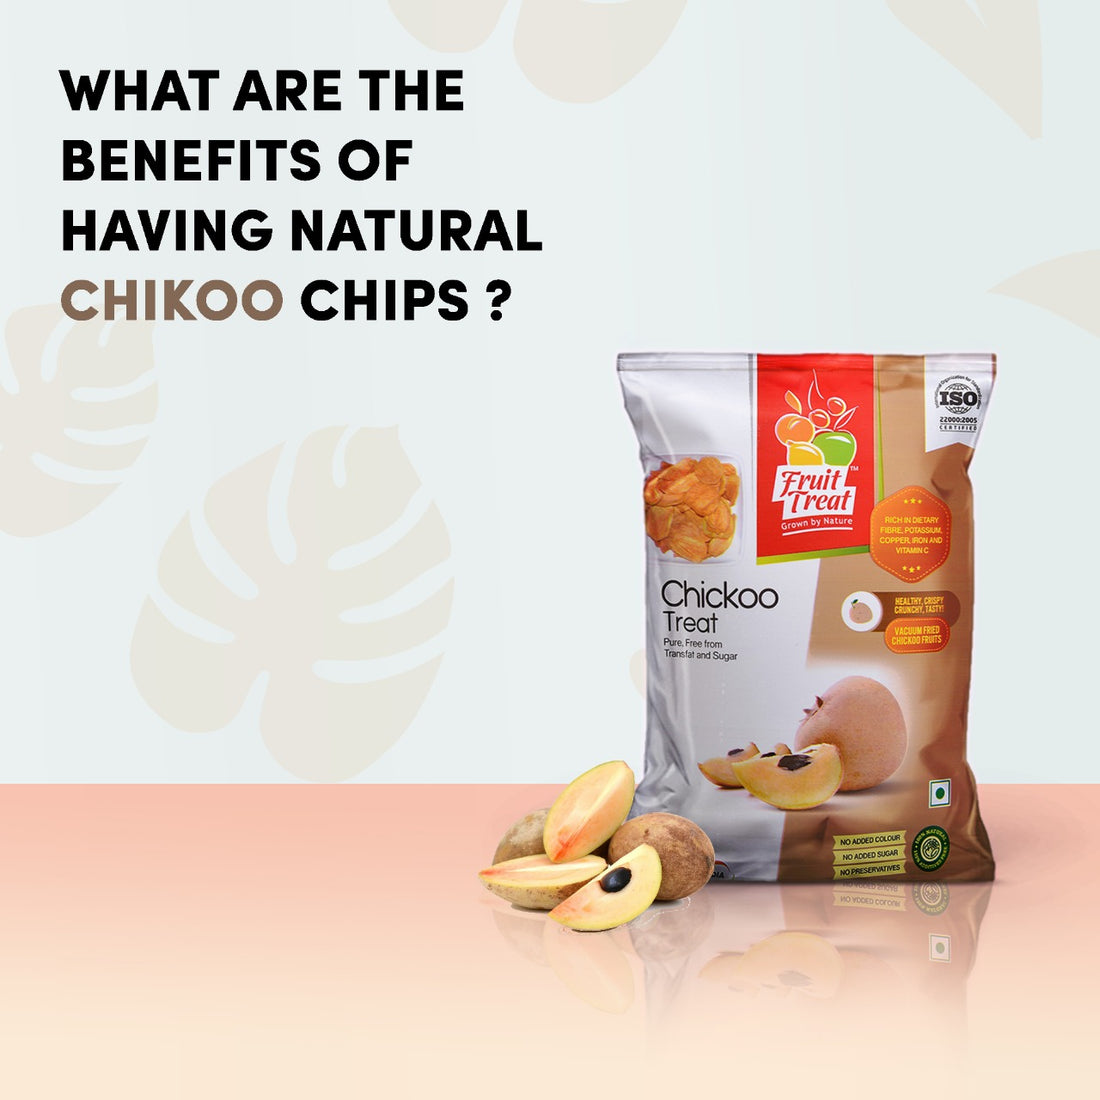 What are the benefits of having Natural Chikoo Chips?